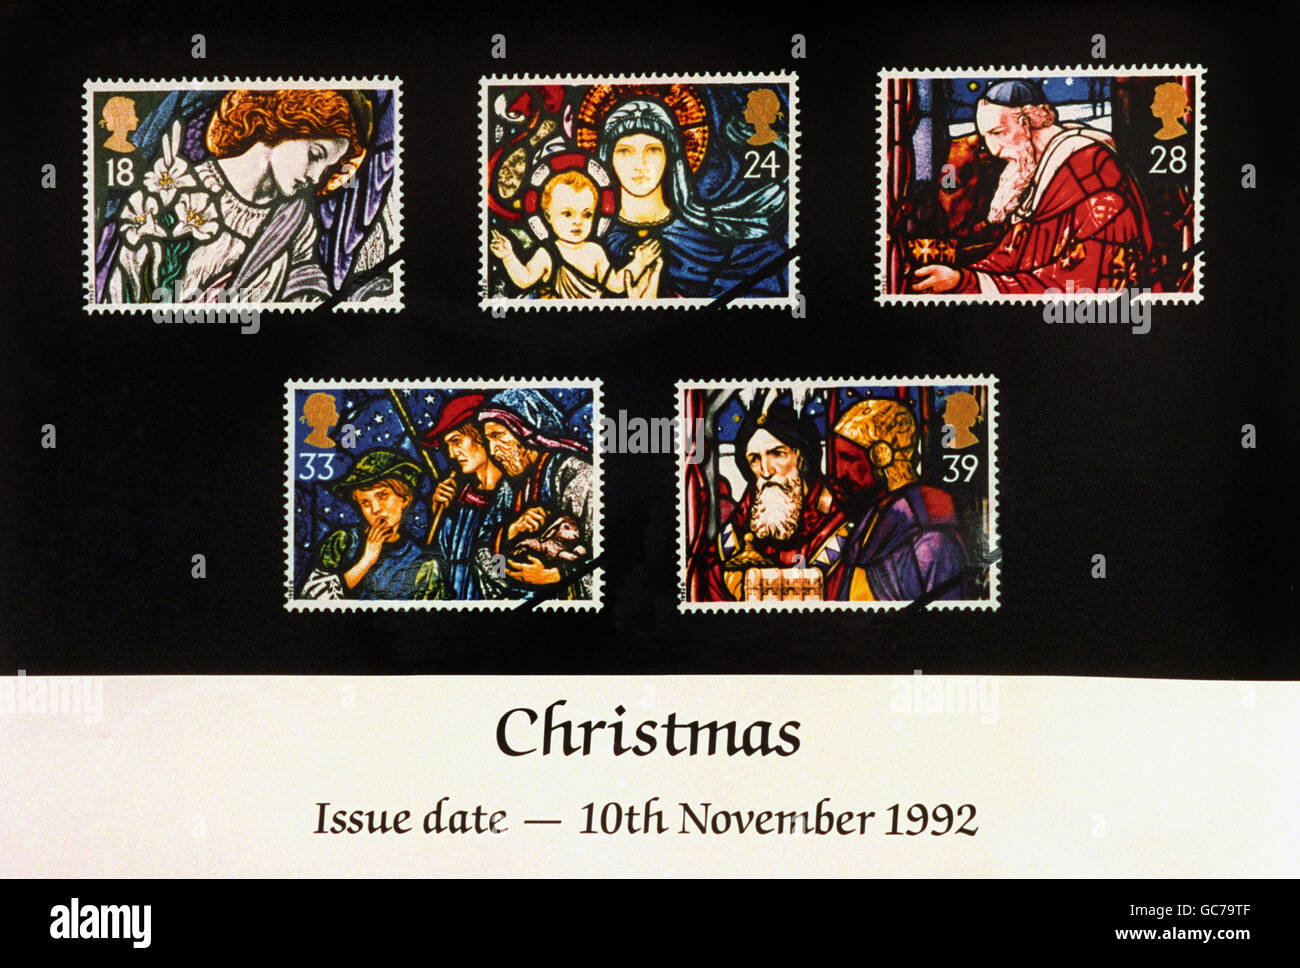 A SET OF FIVE CHRISTMAS STAMPS, DEPICTING NATIVITY SCENES FROM THE STAINED GLASS WINDOWS OF BRITISH CHURCHES. Stock Photo